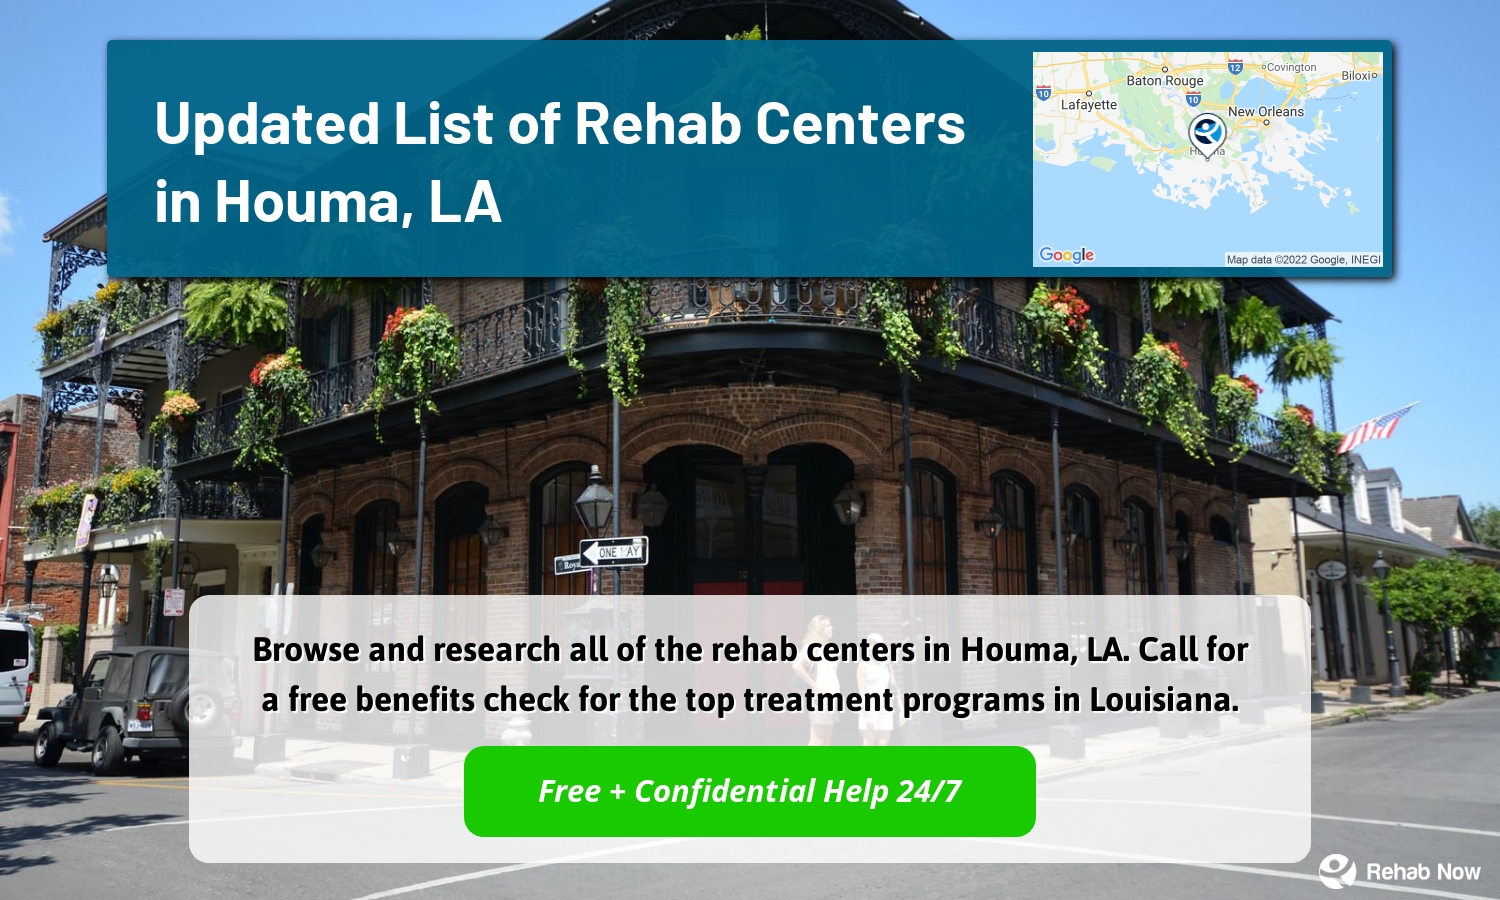 Browse and research all of the rehab centers in Houma, LA. Call for a free benefits check for the top treatment programs in Louisiana.